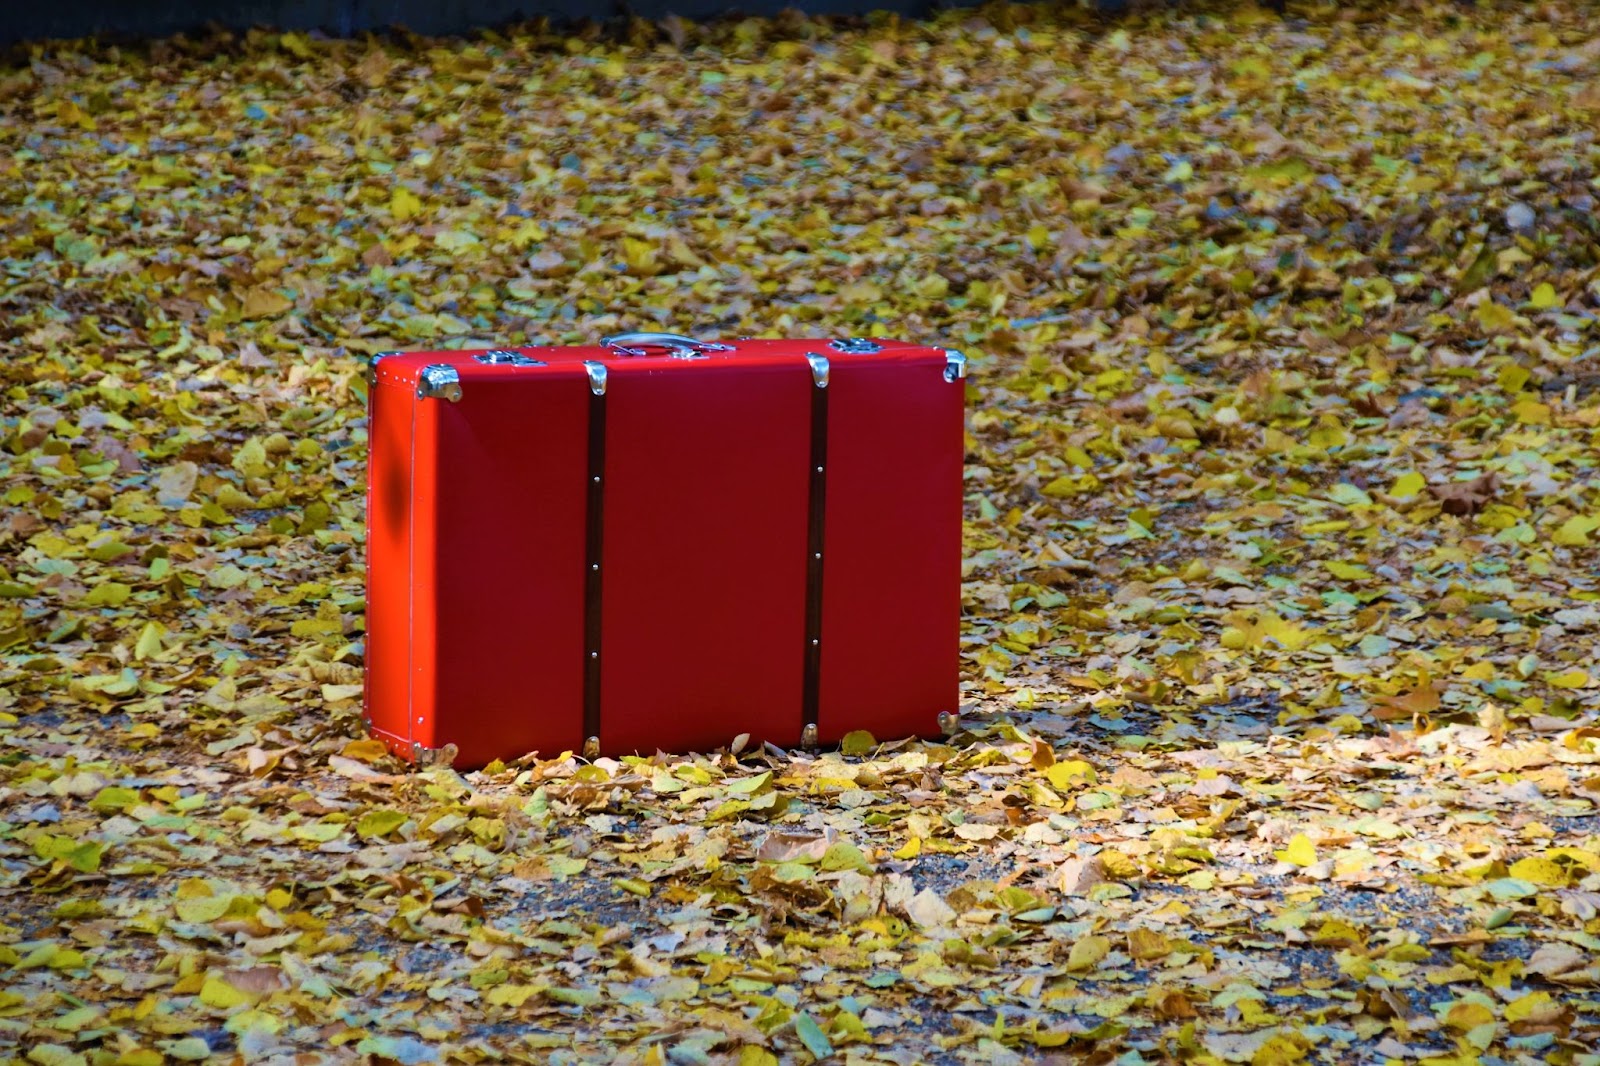 suitcase on the ground amongst fallen leaves